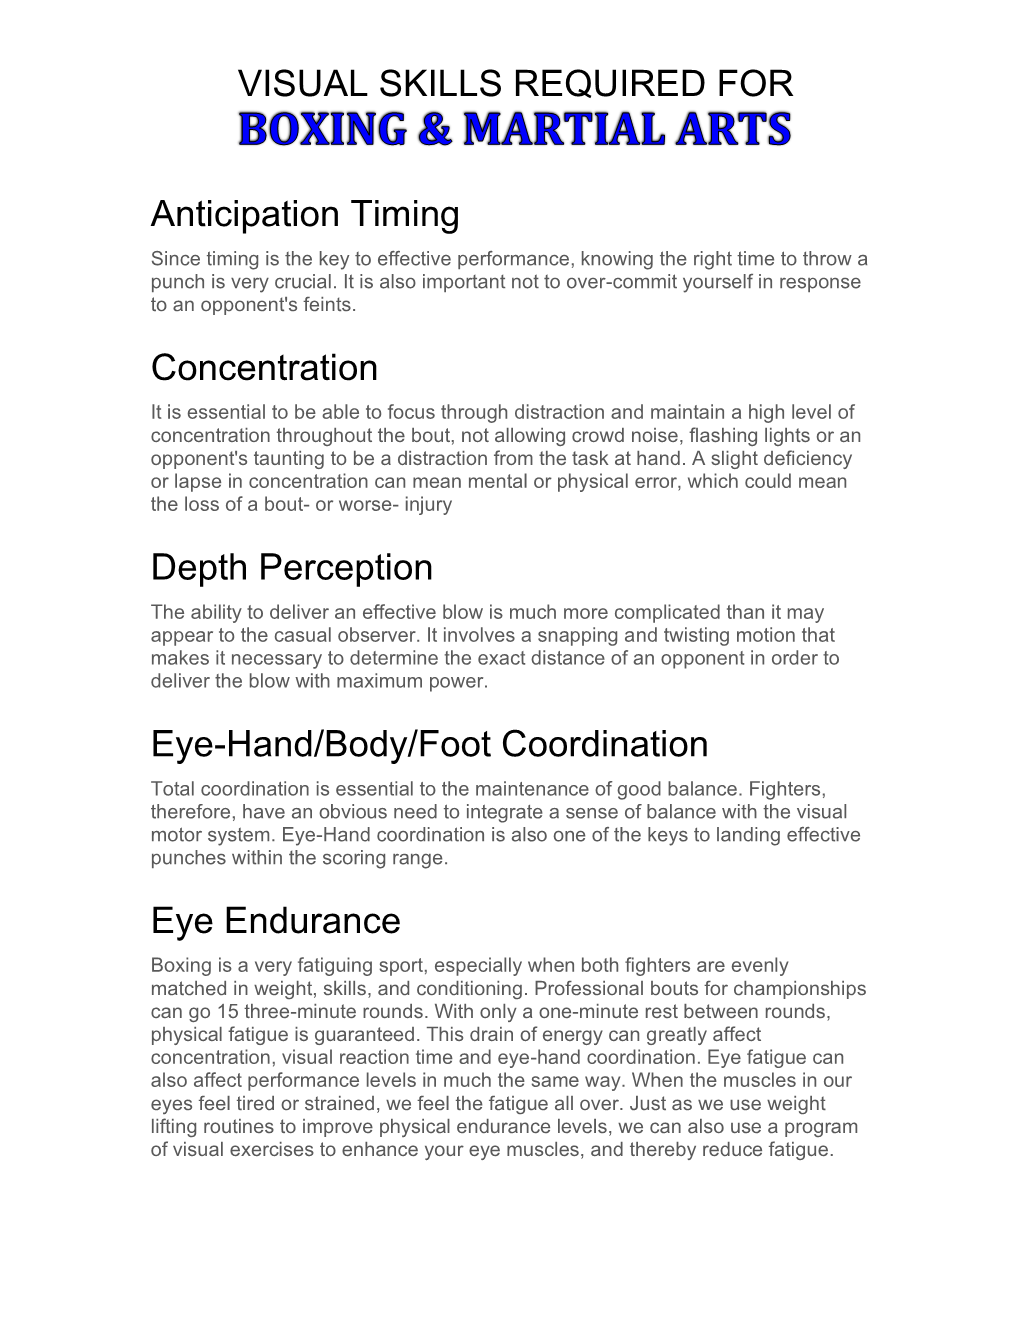 Anticipation Timing Concentration Depth Perception Eye-Hand/Body